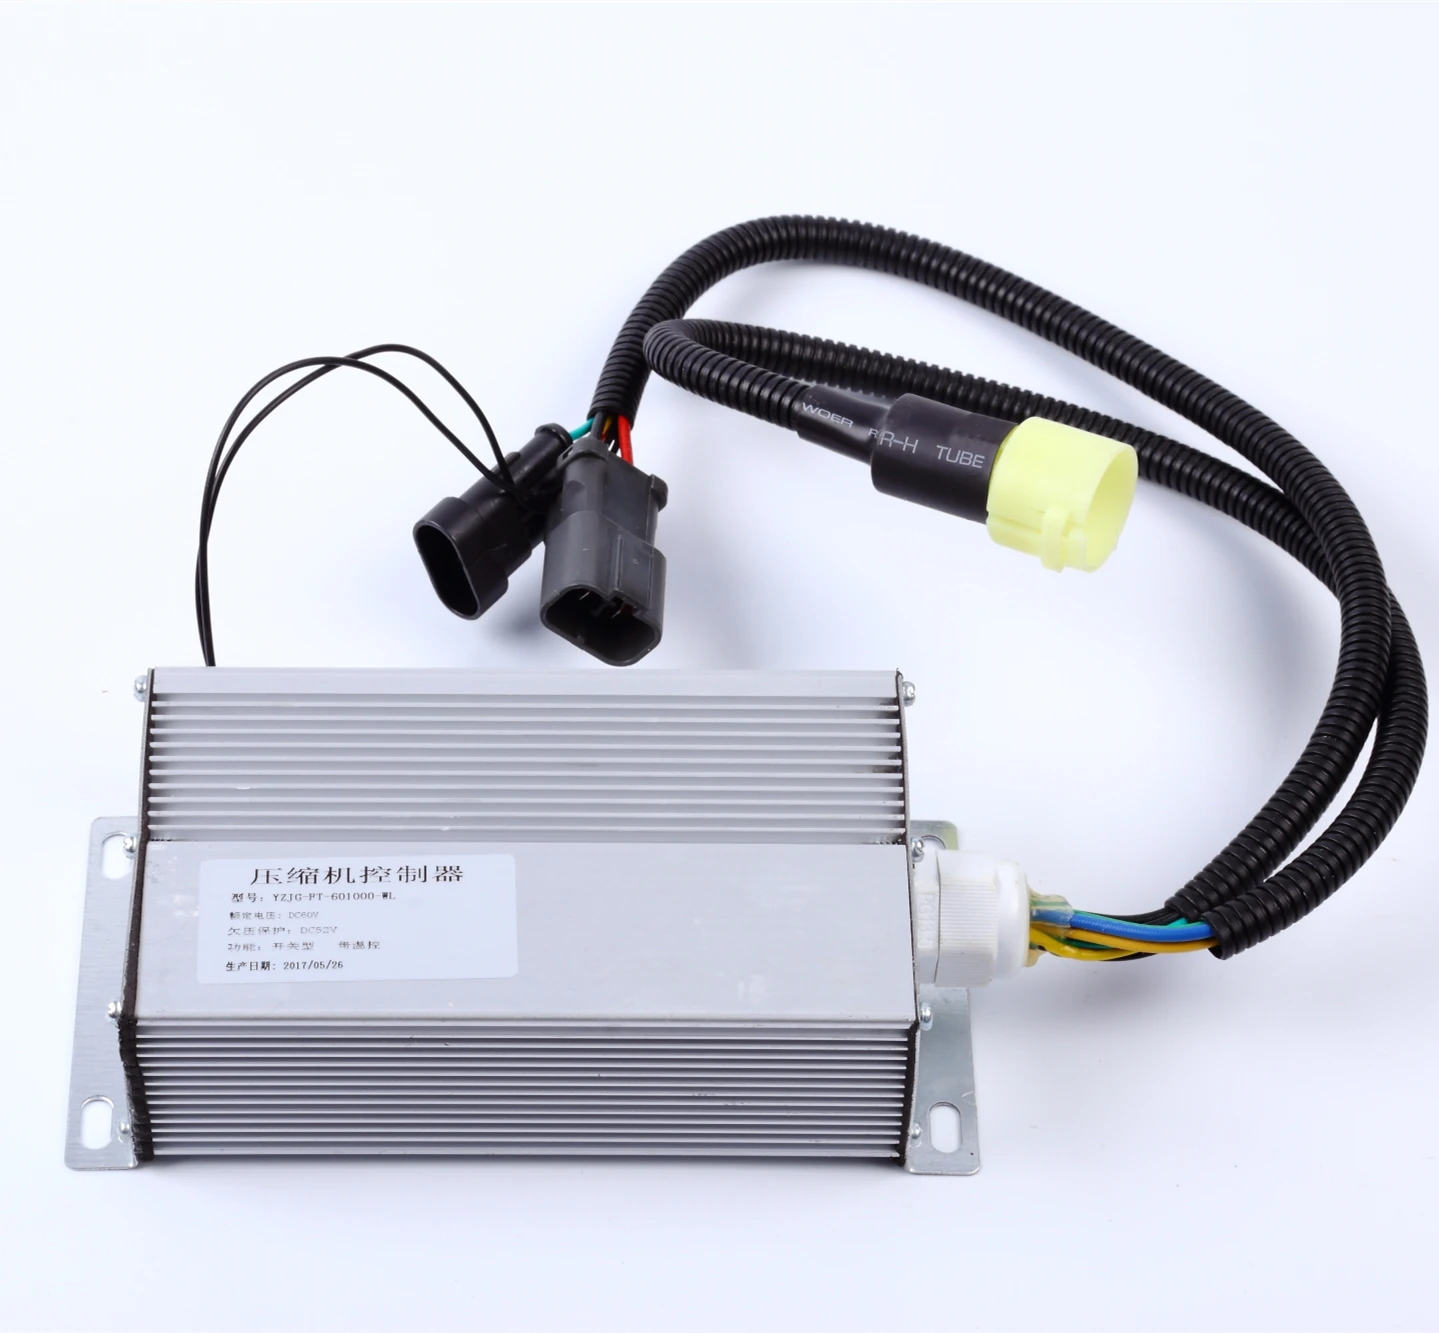 Electric vehicle air conditioning compressor controller 12v24v48v60v72v electric automotive air conditioning compressor 72volts for small ev aircon